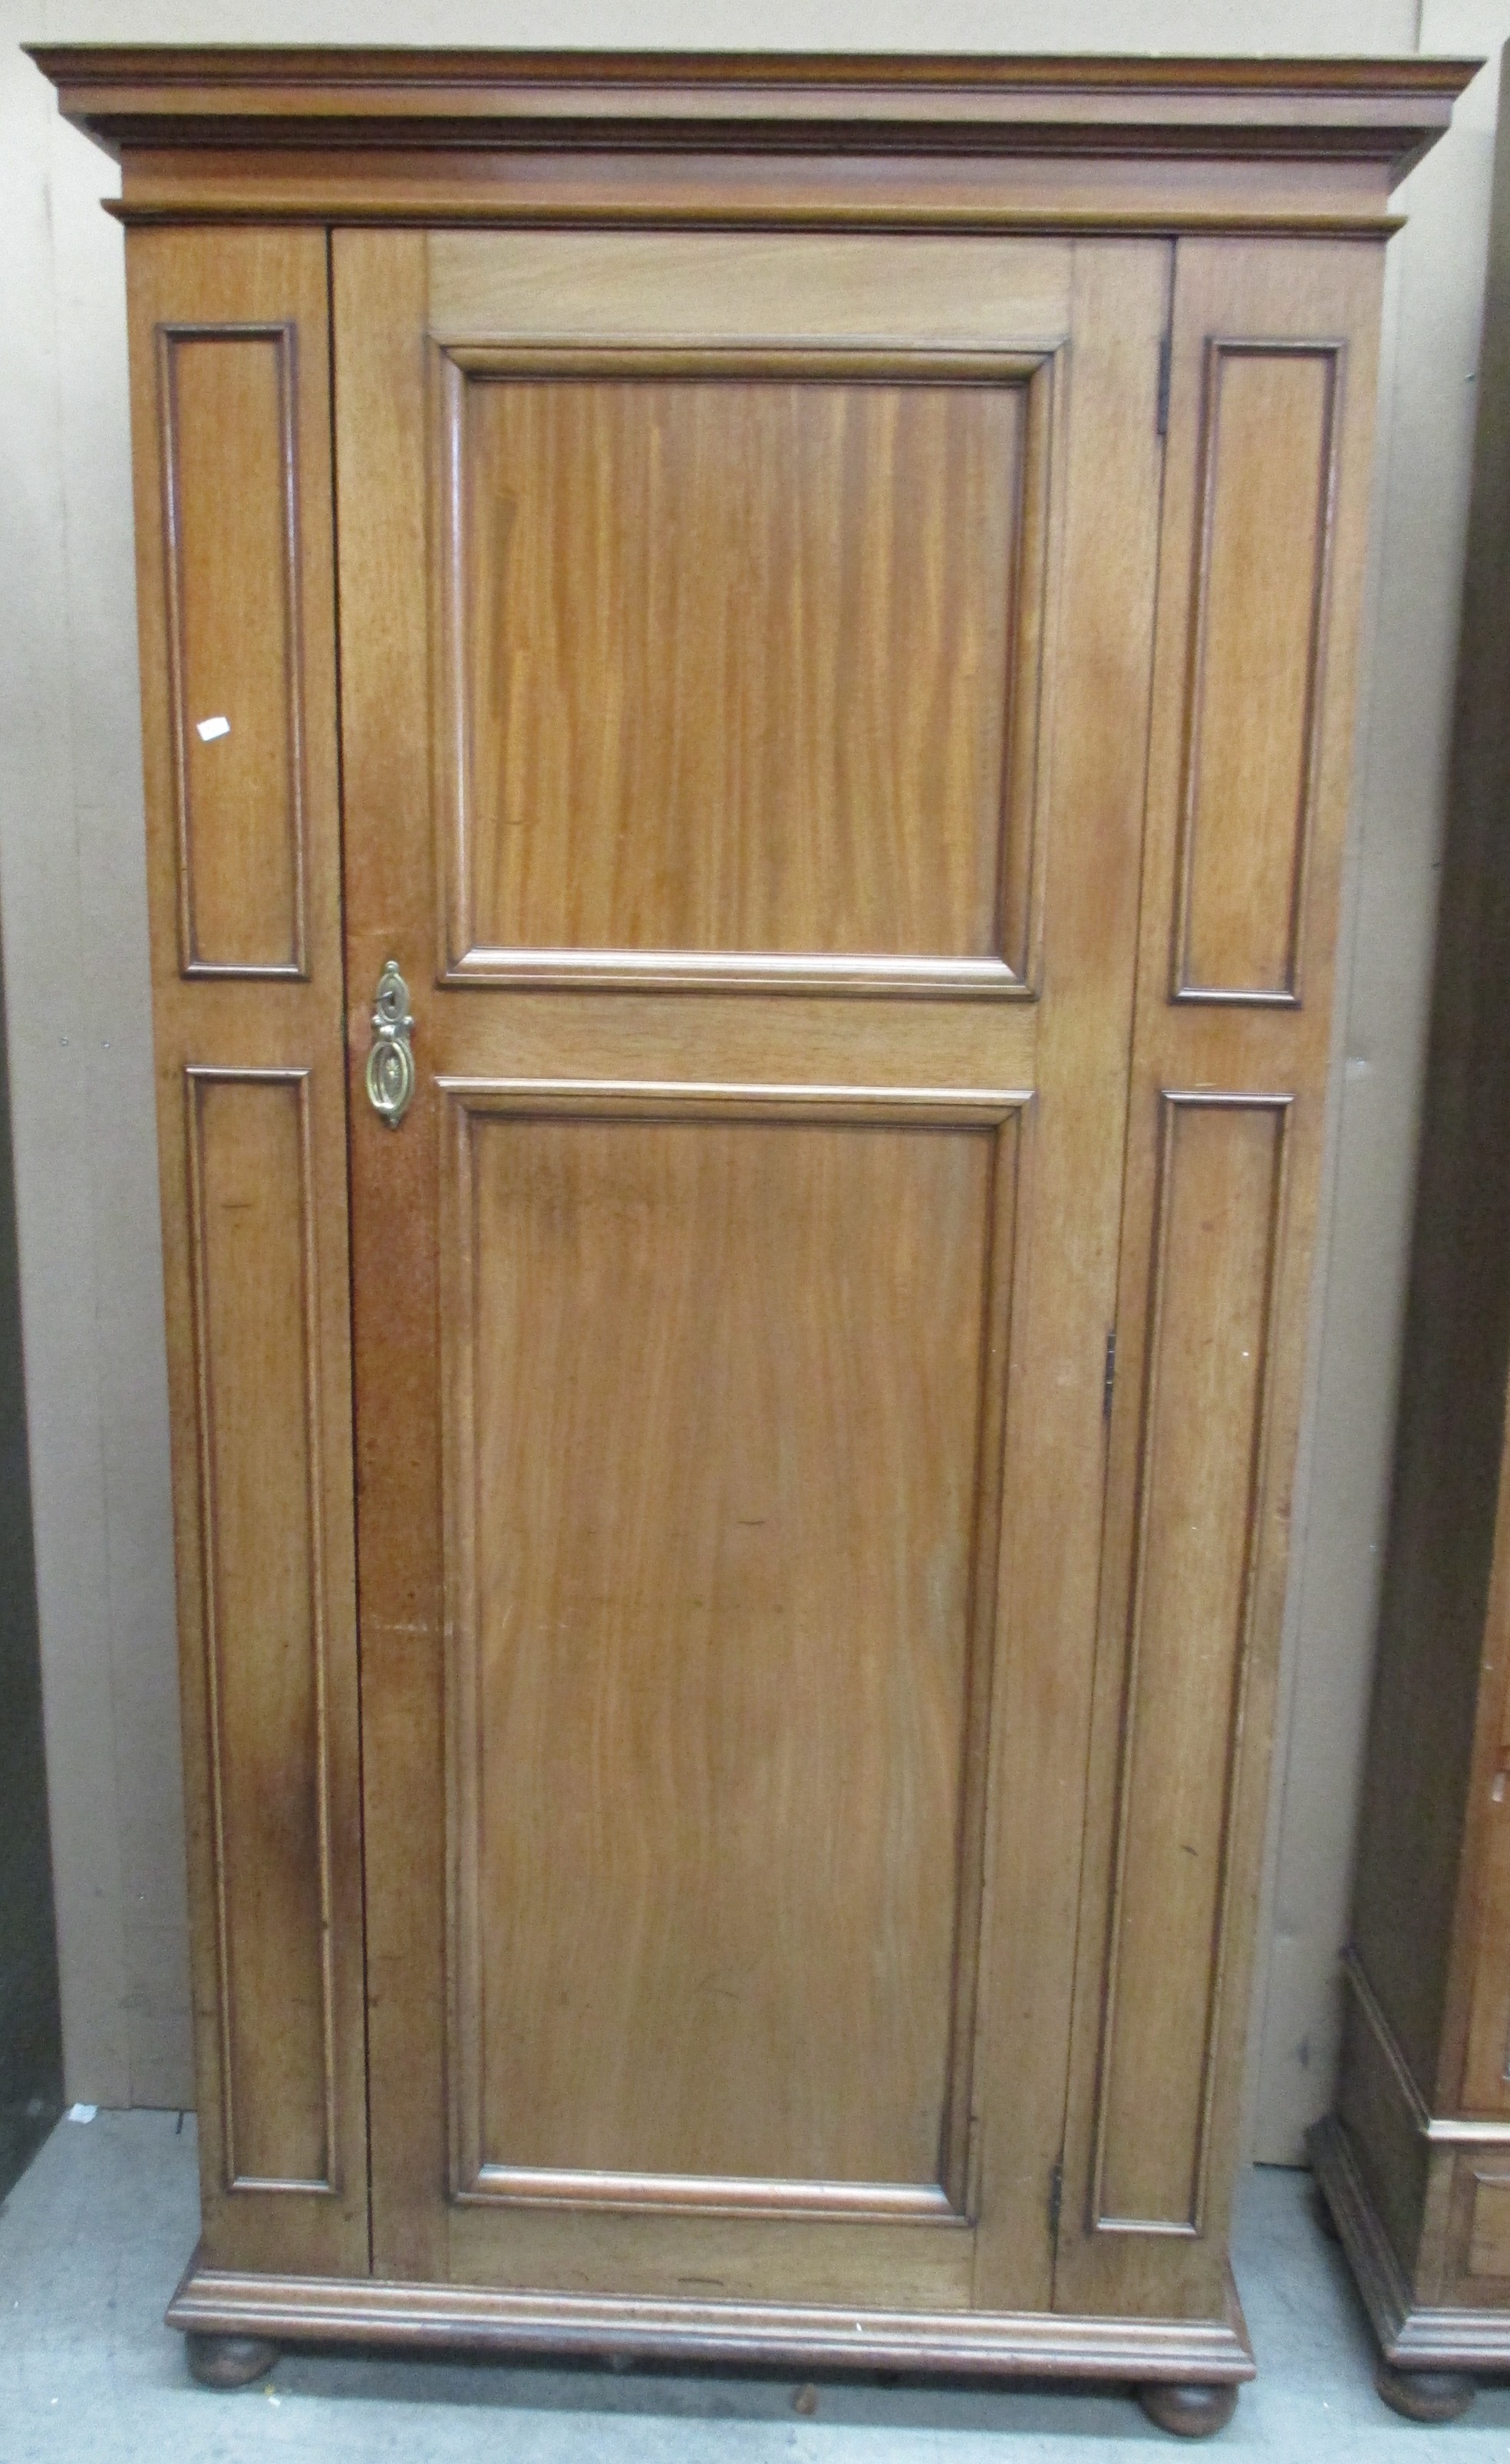 A mahogany hall robe with moulded panel door and sides, on flattened bun feet - 92 cm. - Image 3 of 3